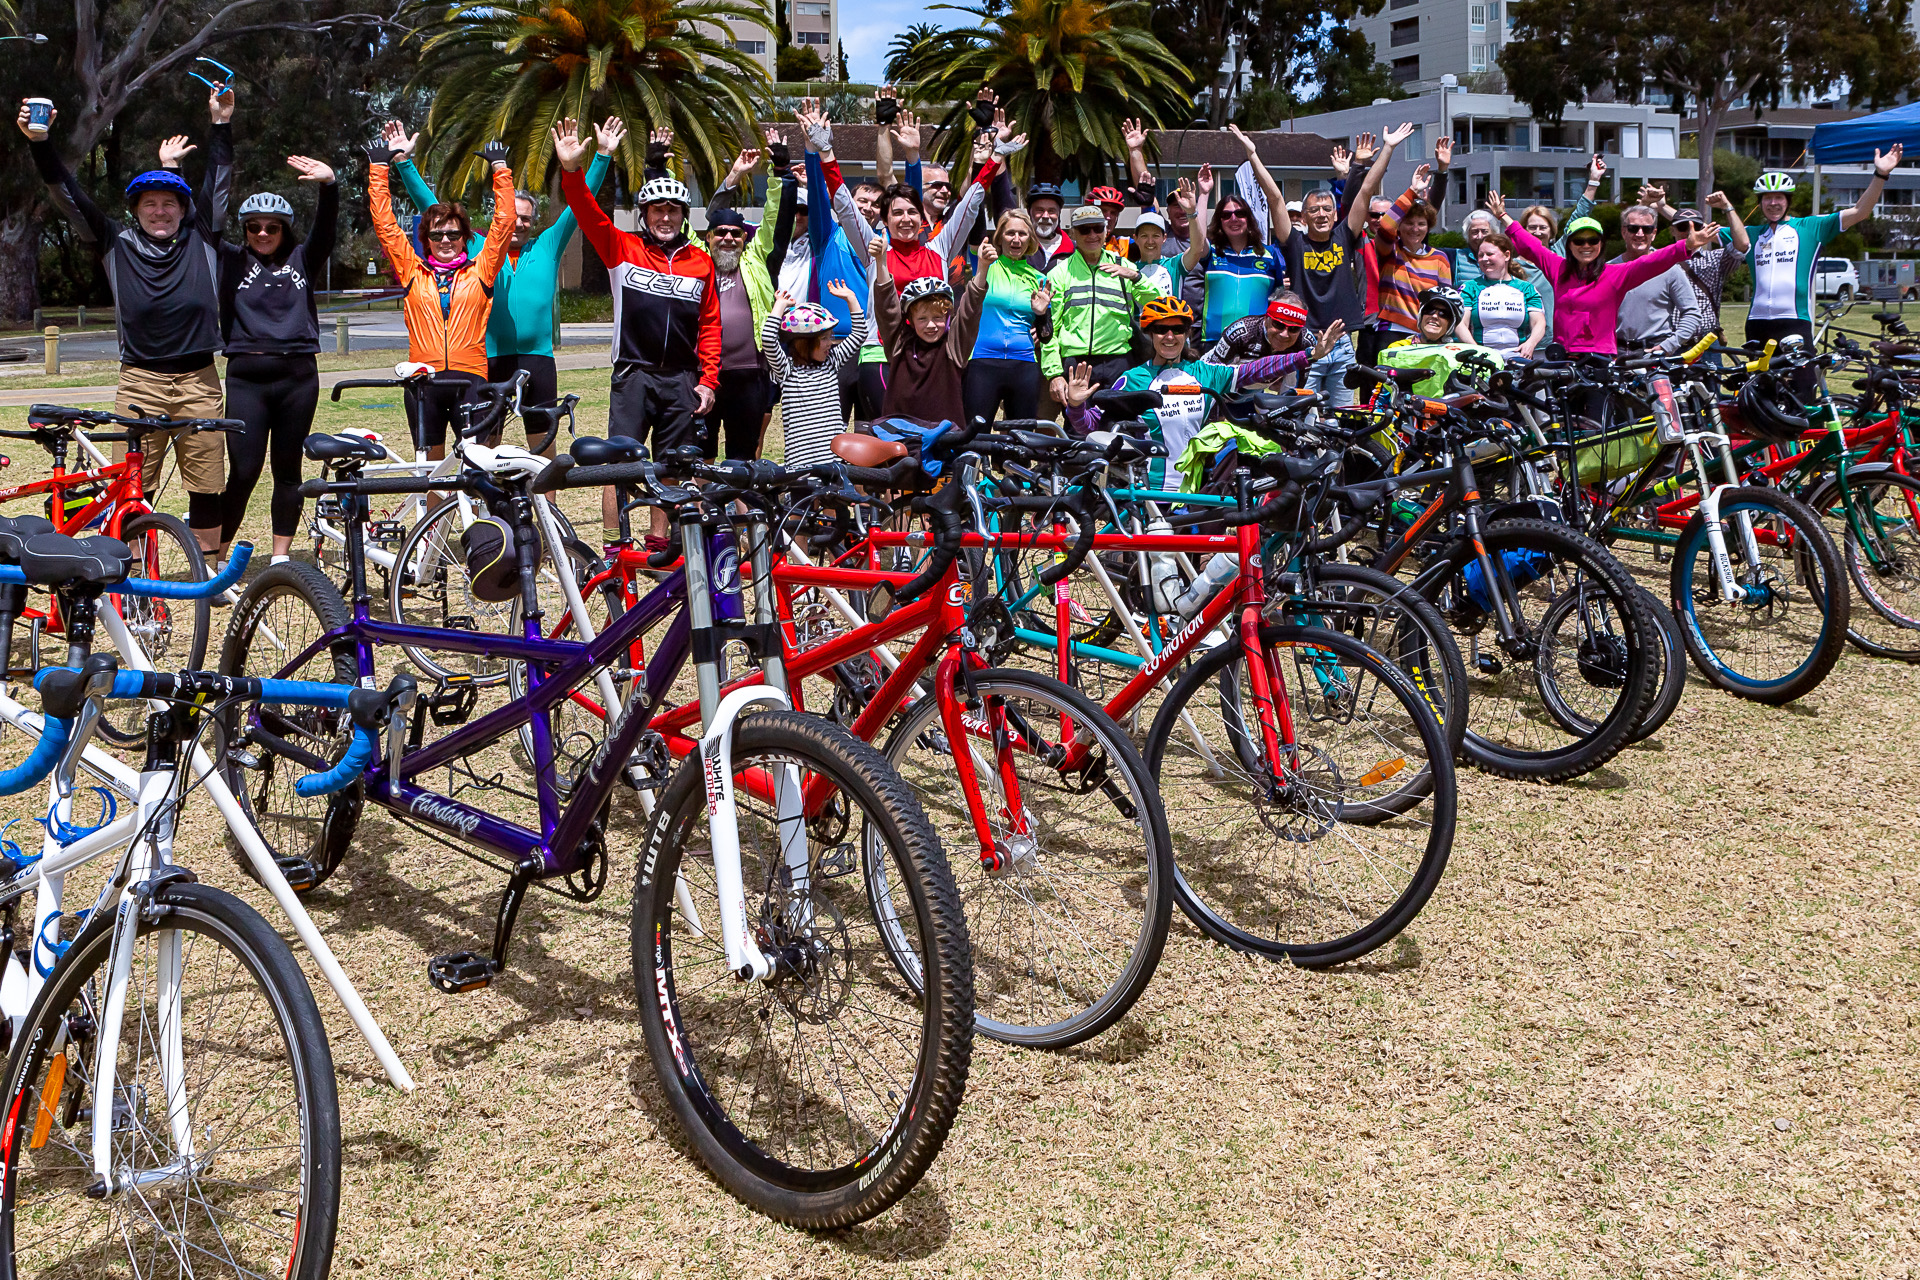 Around 30-40 tandem cyclists of all ages are standing and waving with arms raised, around 20 tandem bikes of all shapes, sizes and colours are lined up in the foreground.